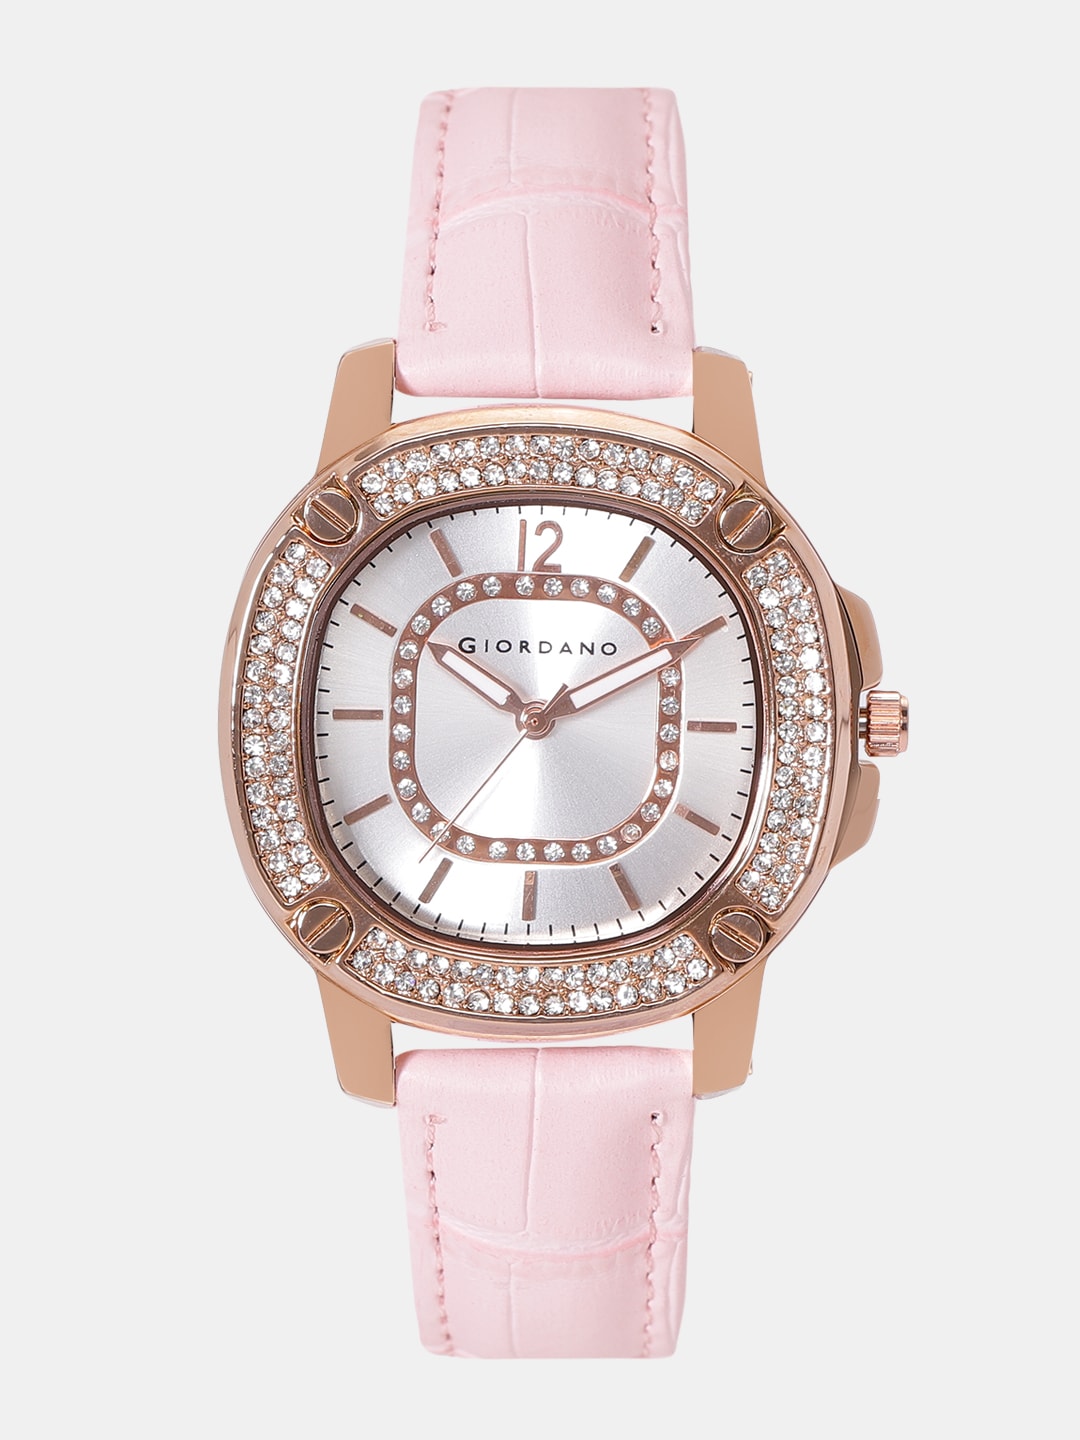 GIORDANO Women Silver-Toned Analogue Watch F2133-02 Price in India